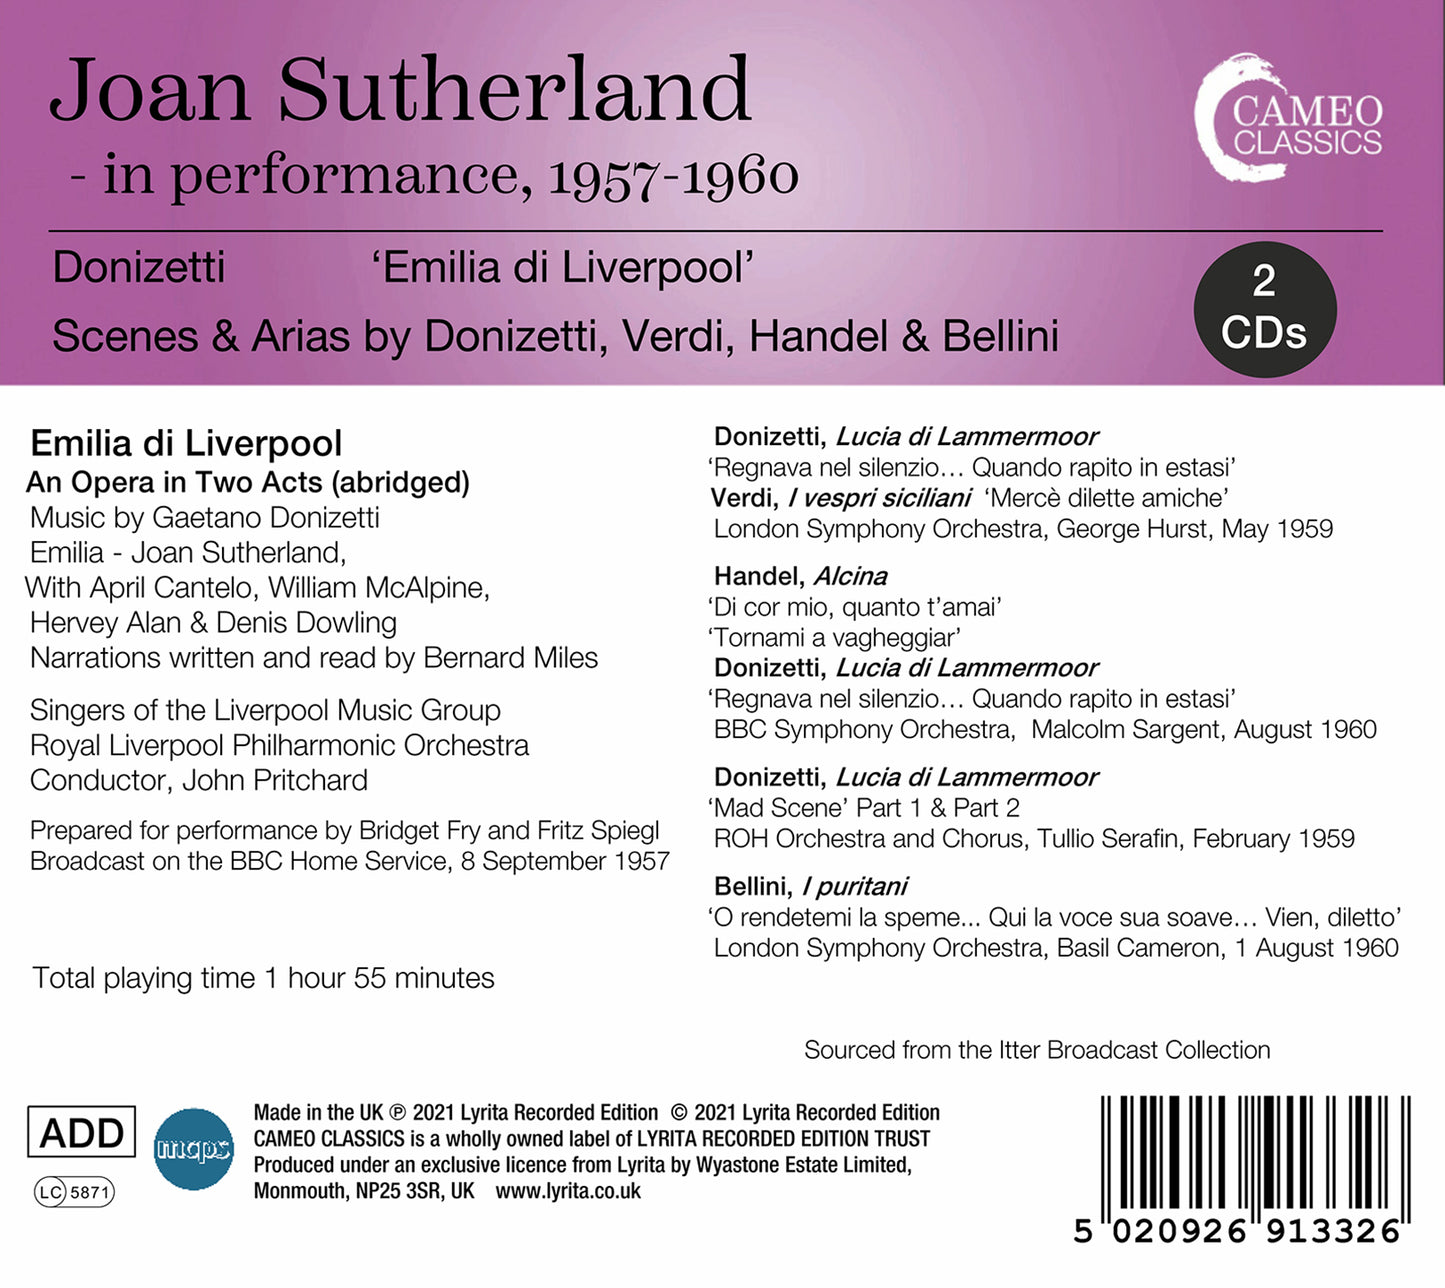 Joan Sutherland - In Performance (1957-1960)